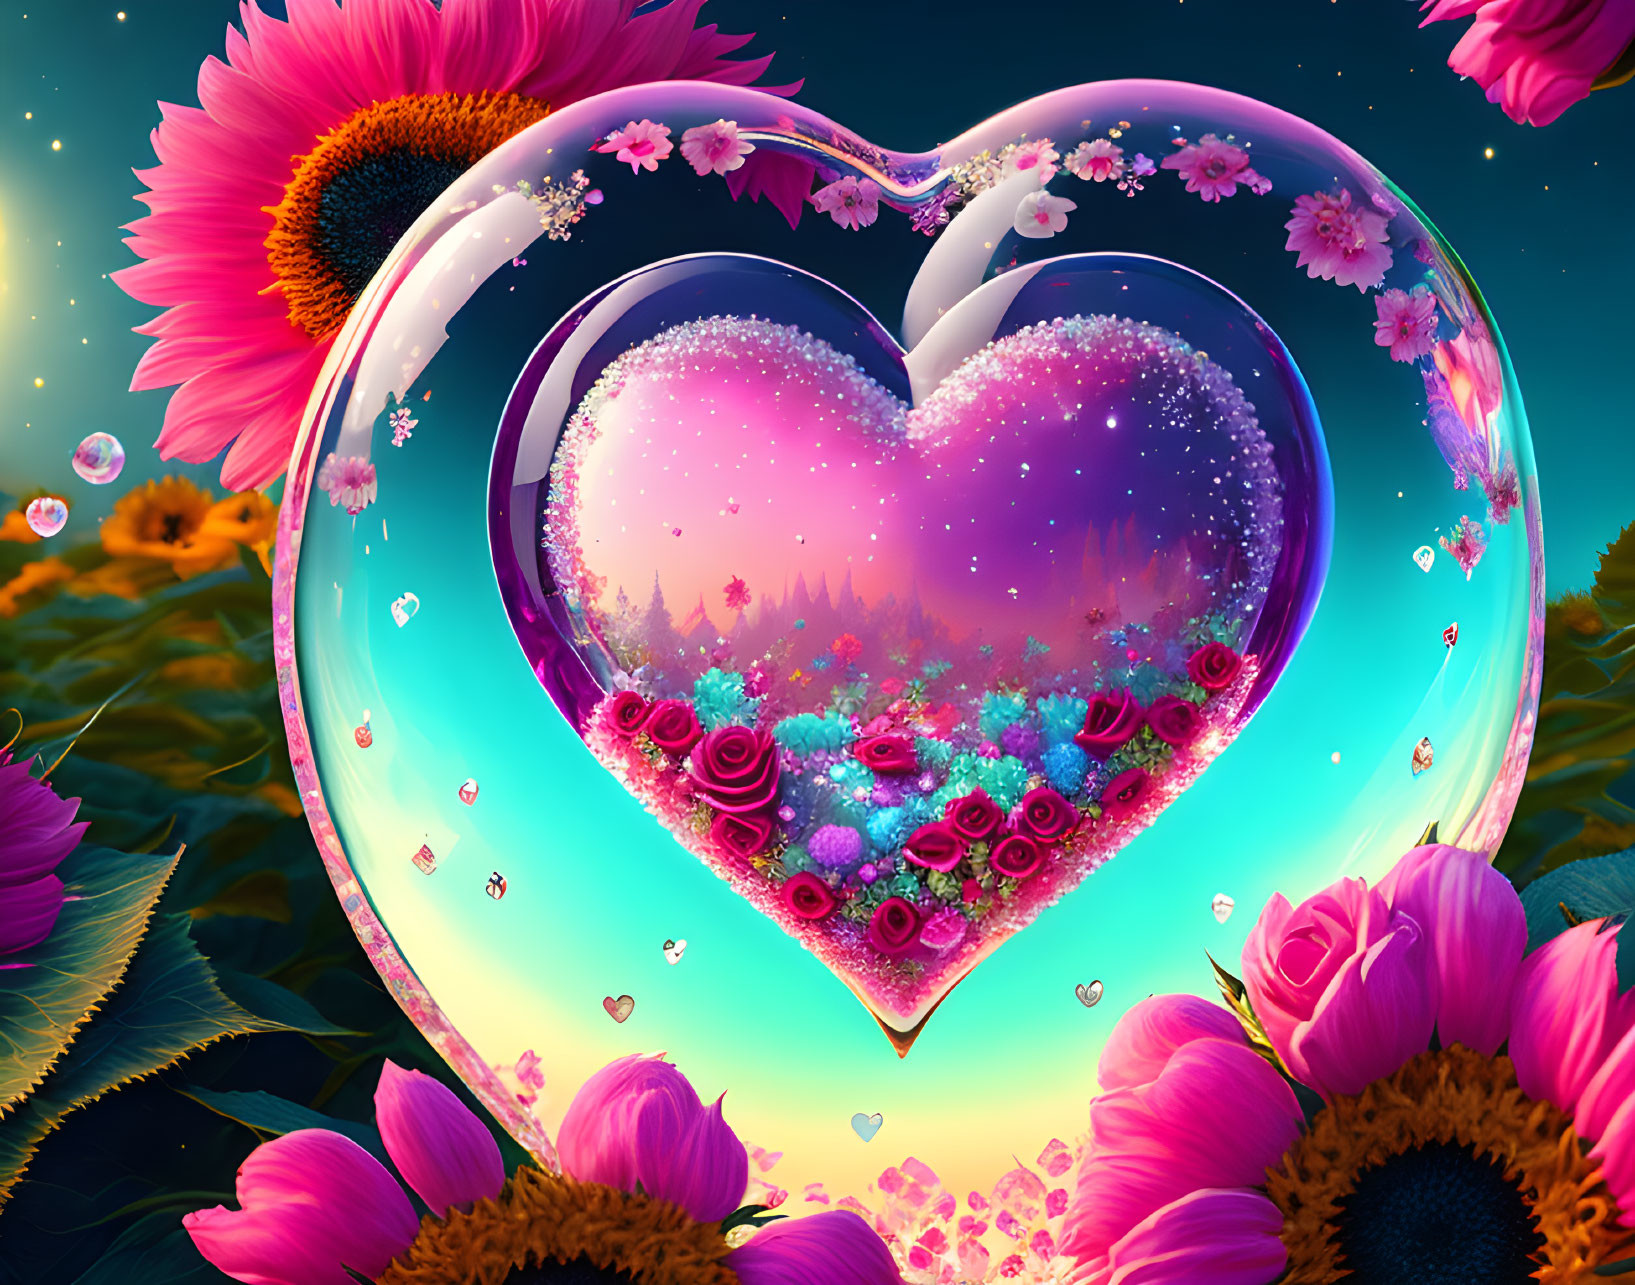 Colorful Heart-shaped Bubble with Magical Forest and Sunflowers Under Starry Sky